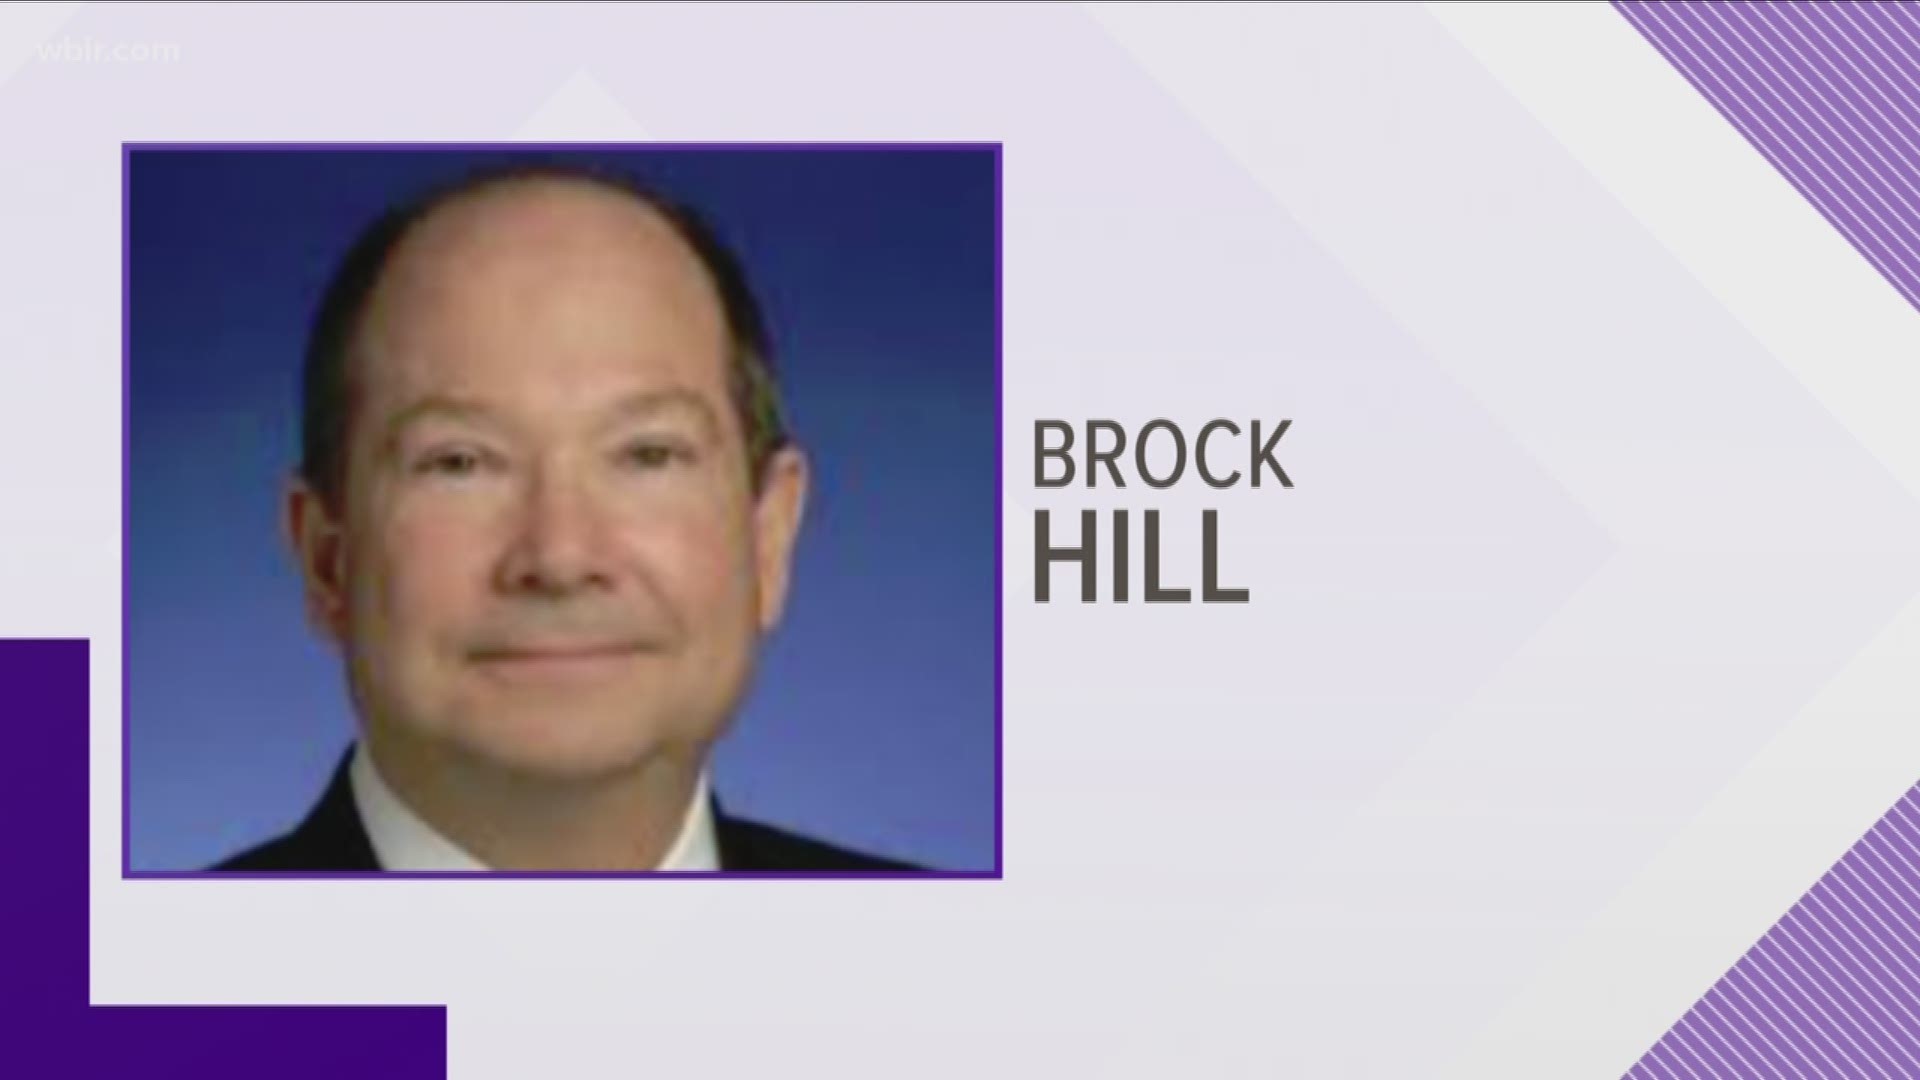 Deputy Commissioner Brock Hill from the State Department of Environmental Conservation has been removed from office after an investigation into "workplace misconduct."